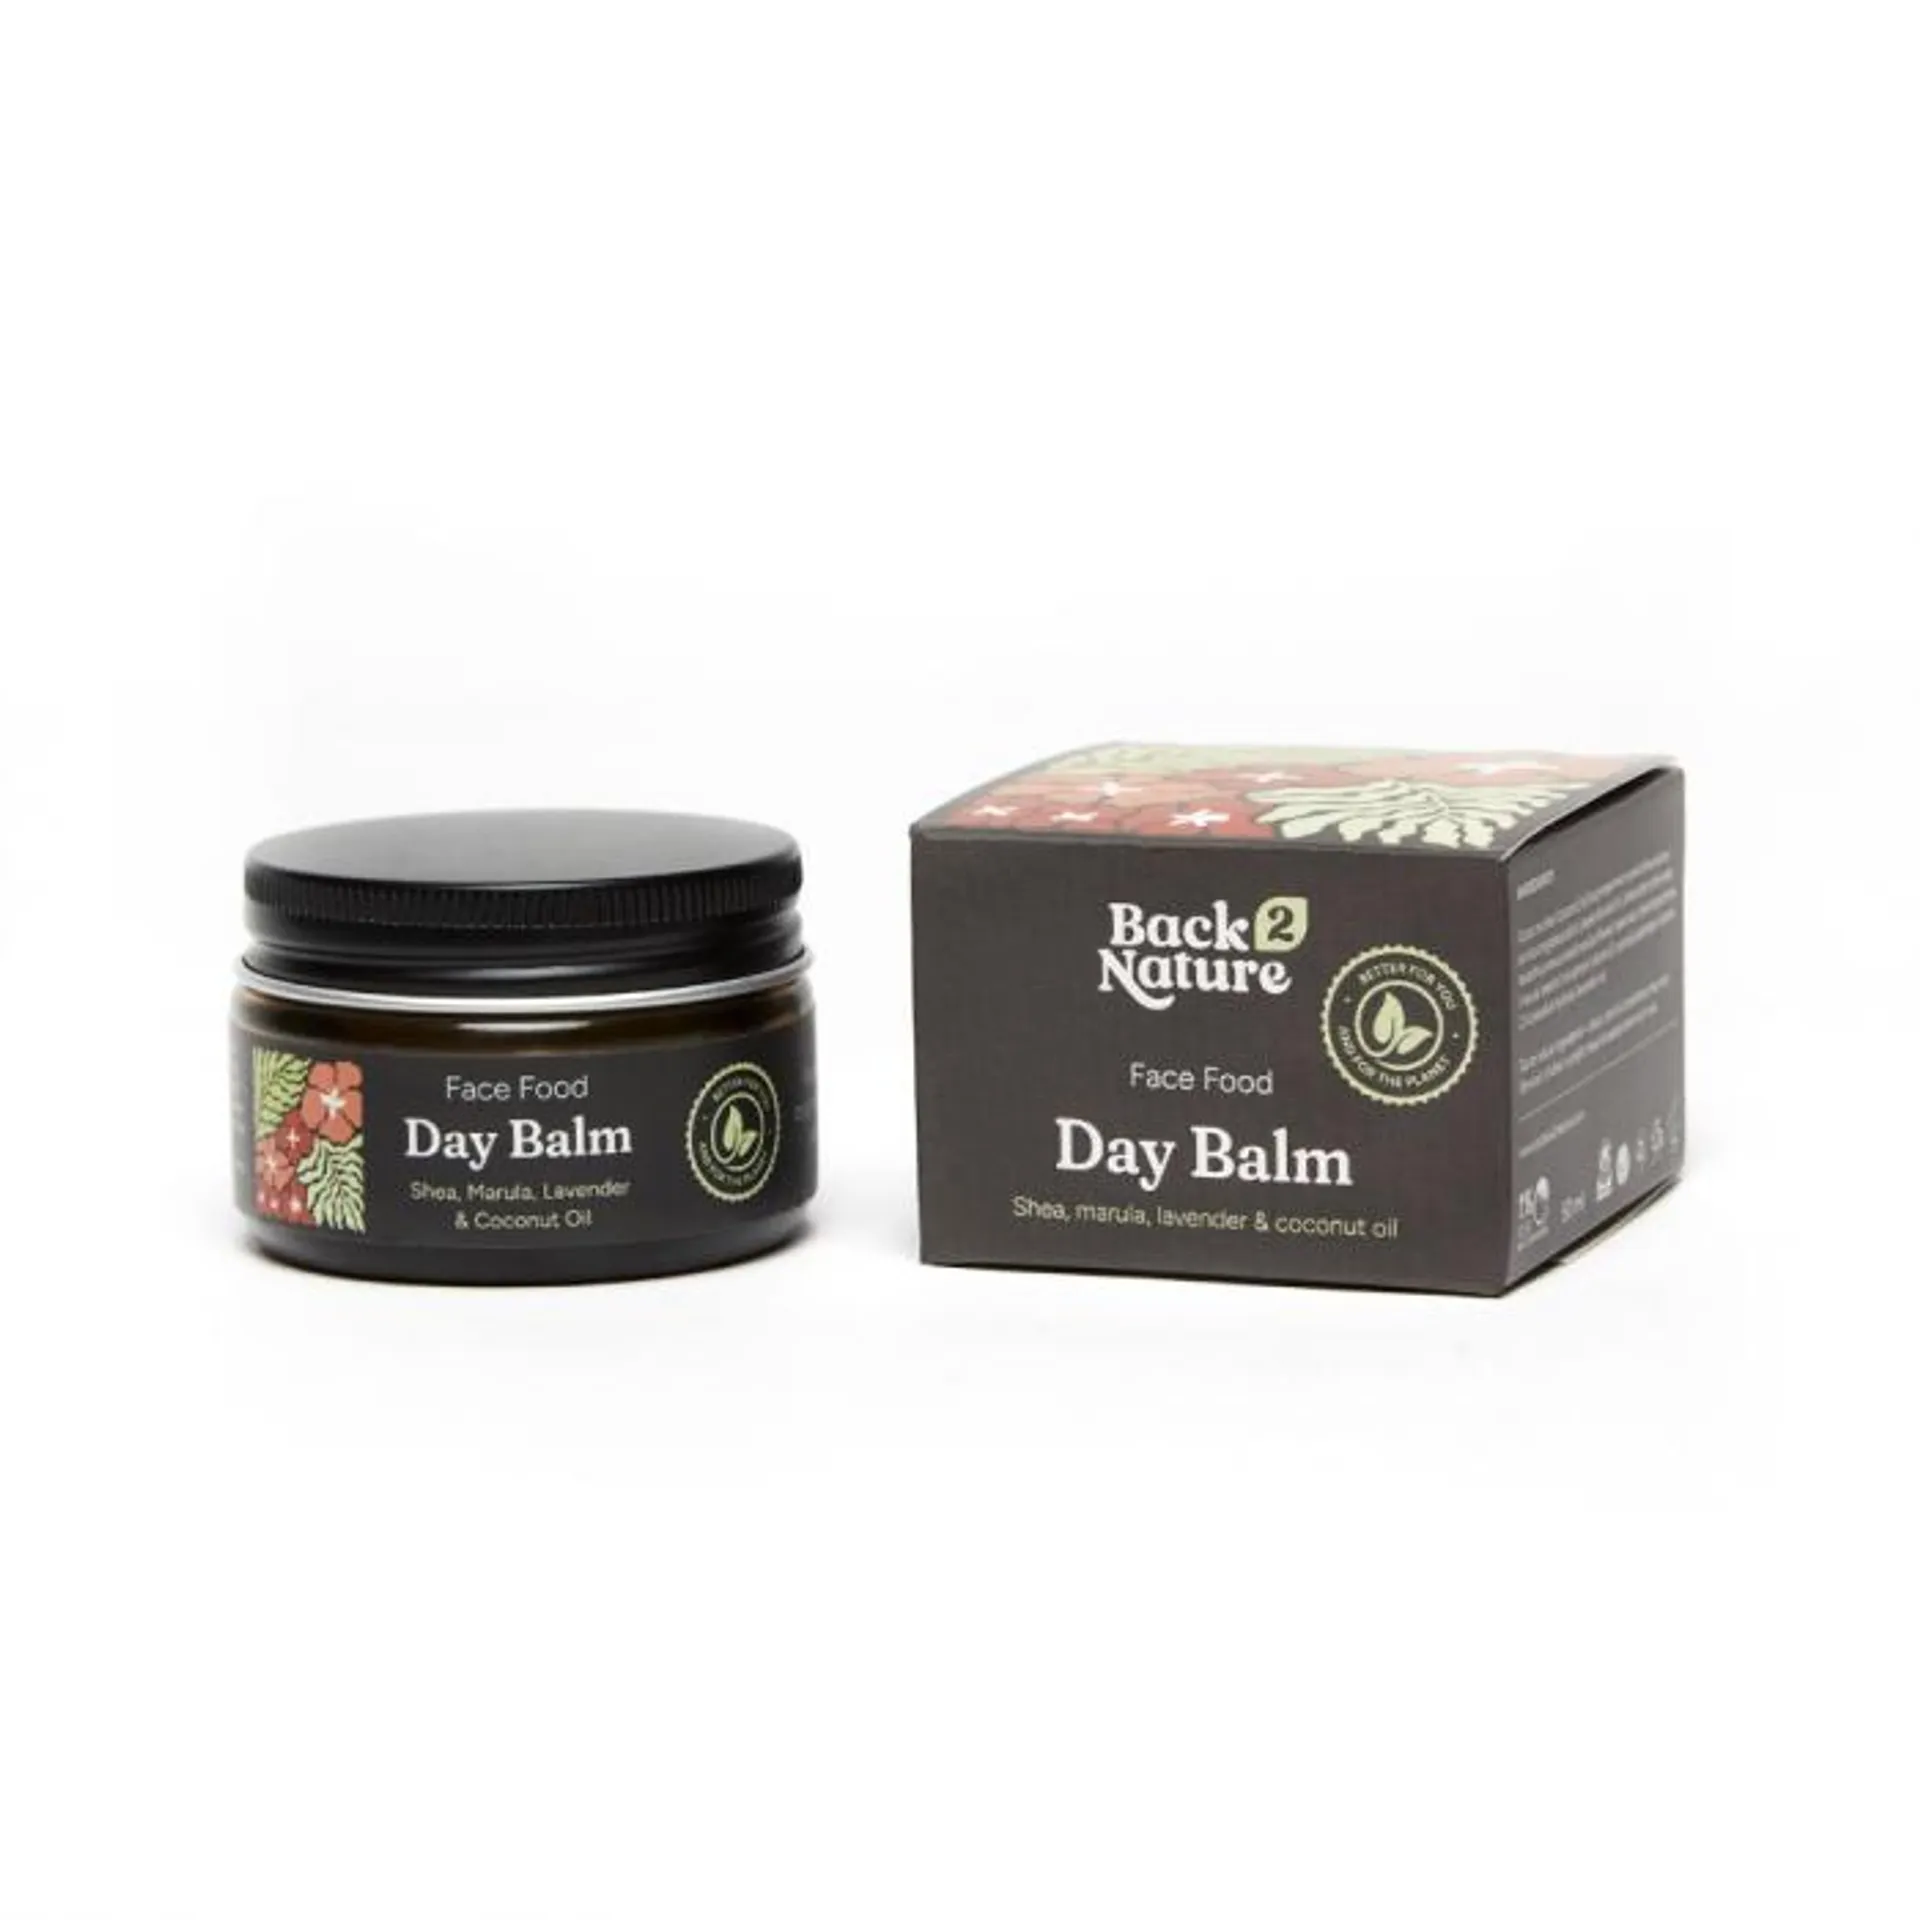 Back 2 Nature - Face Food Day Balm 50ml